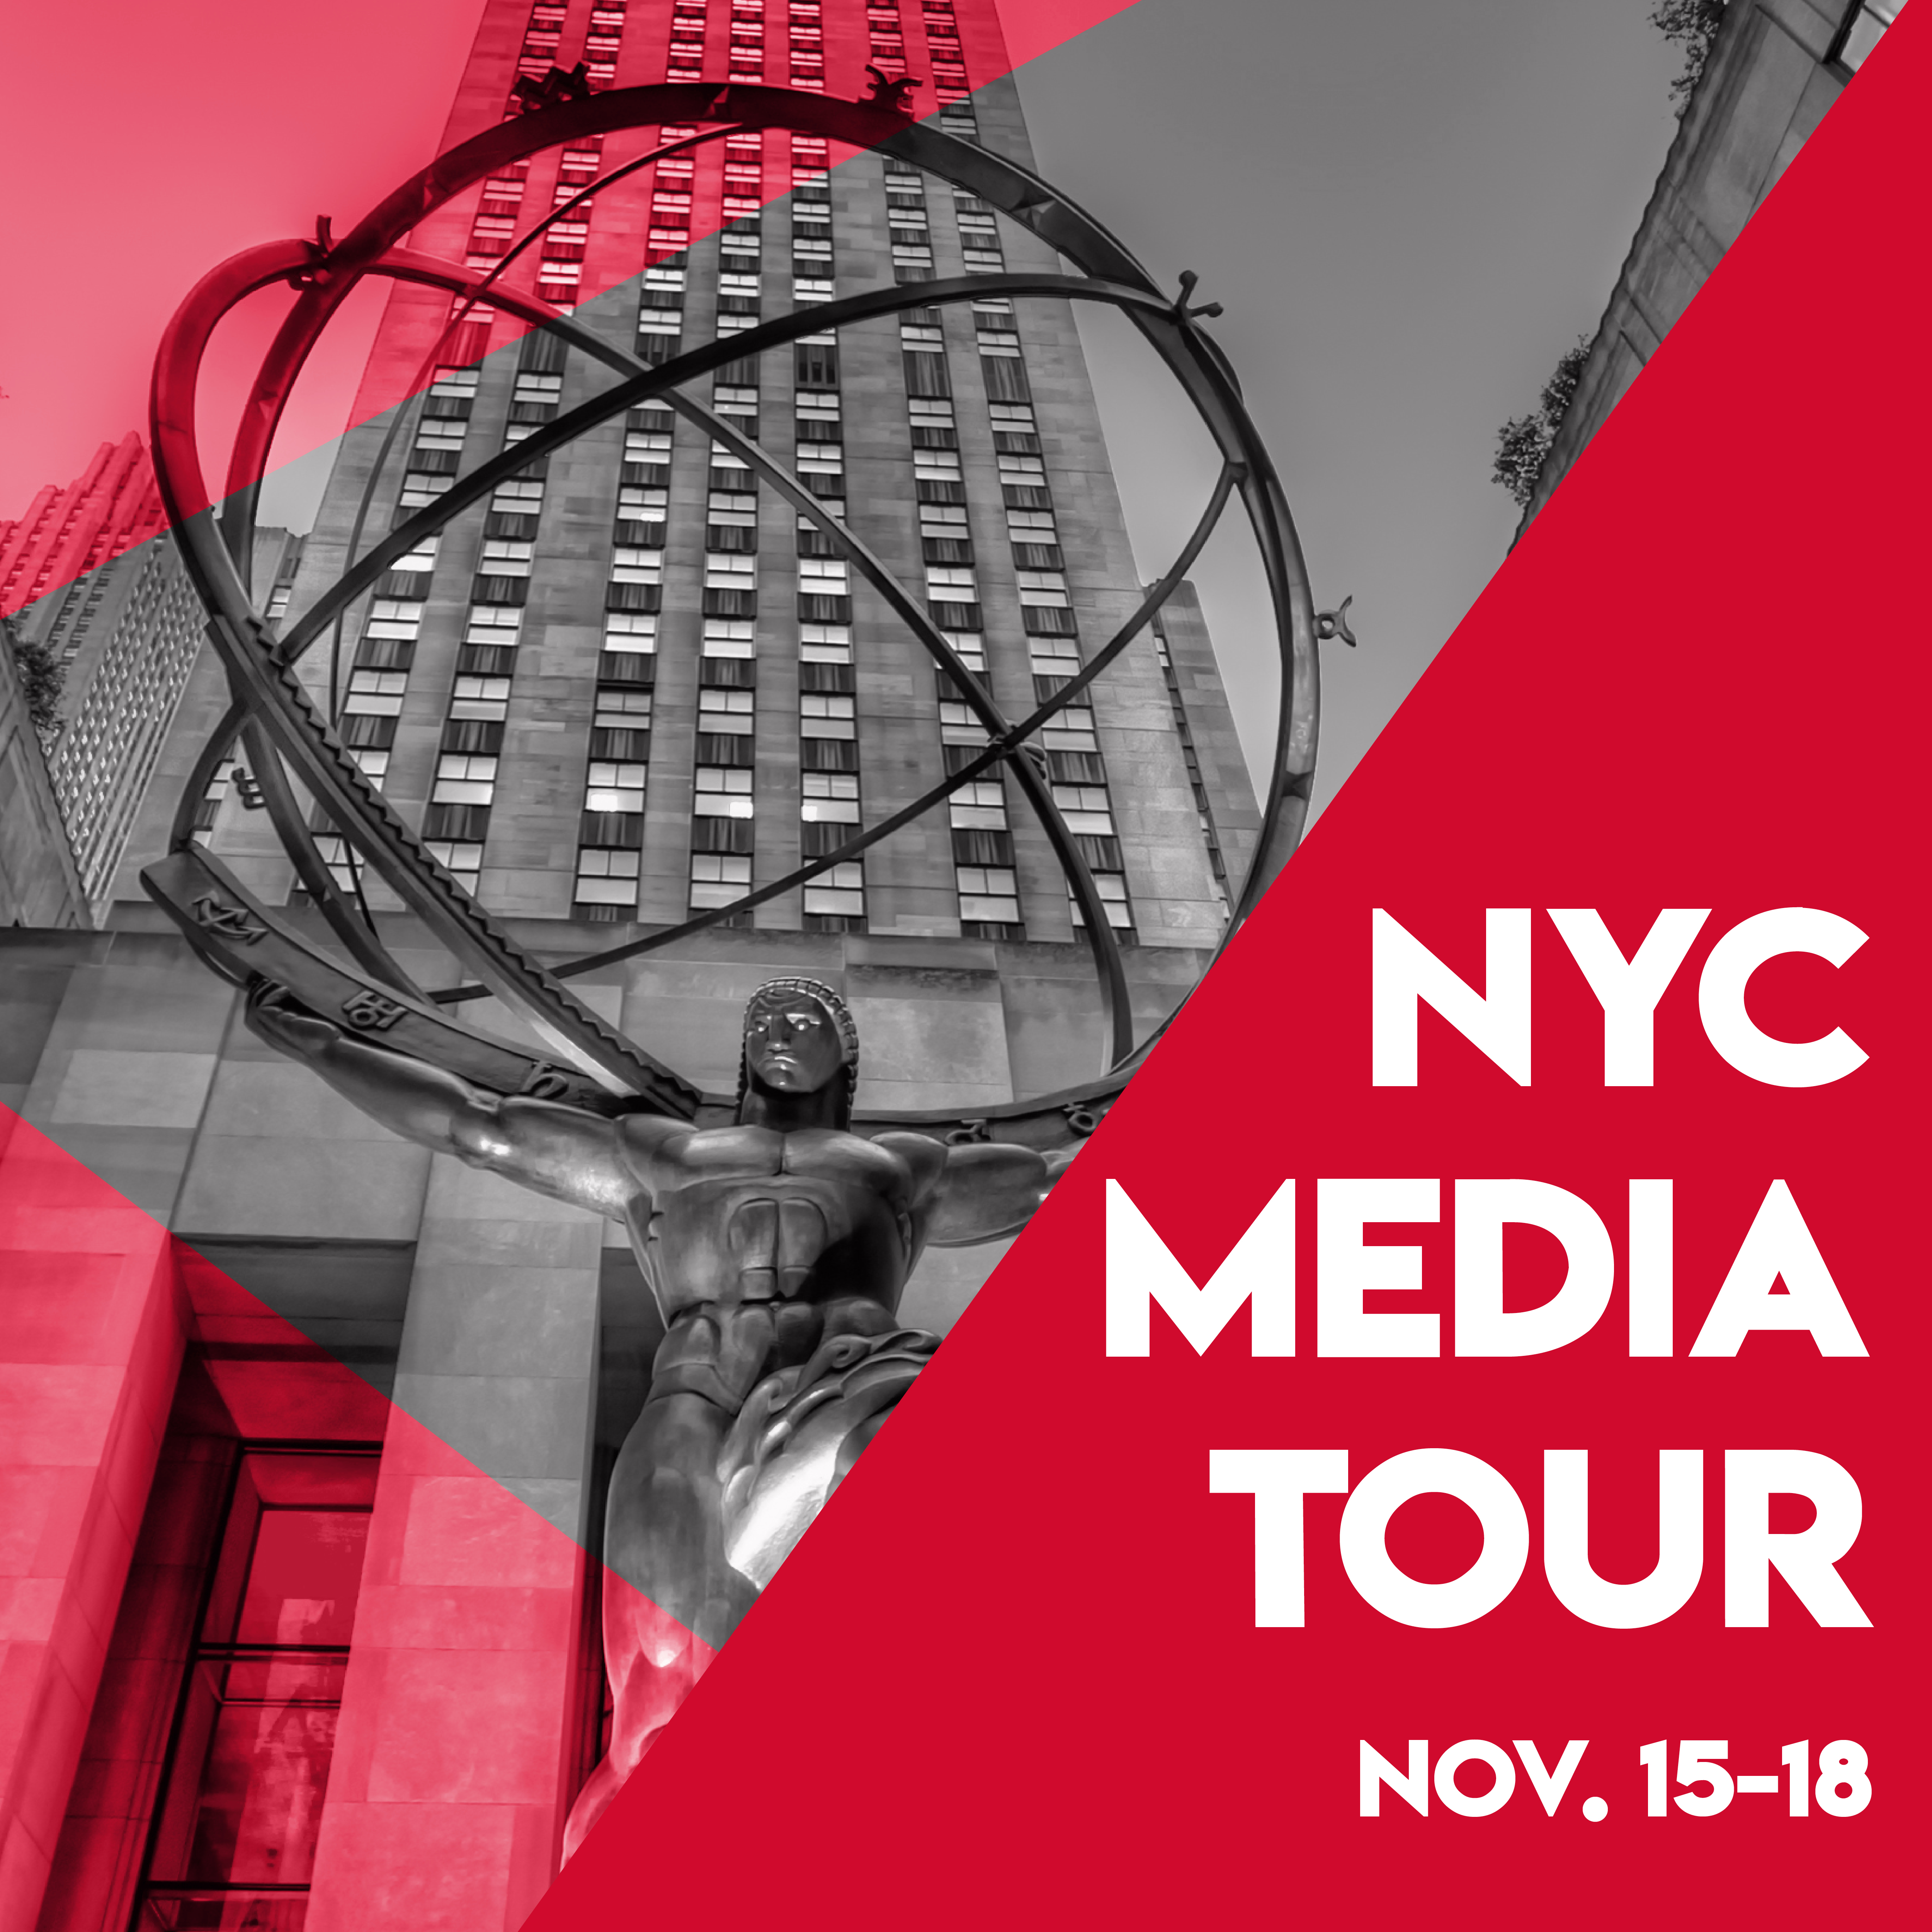 Deadline moved up for NYC Media Tour